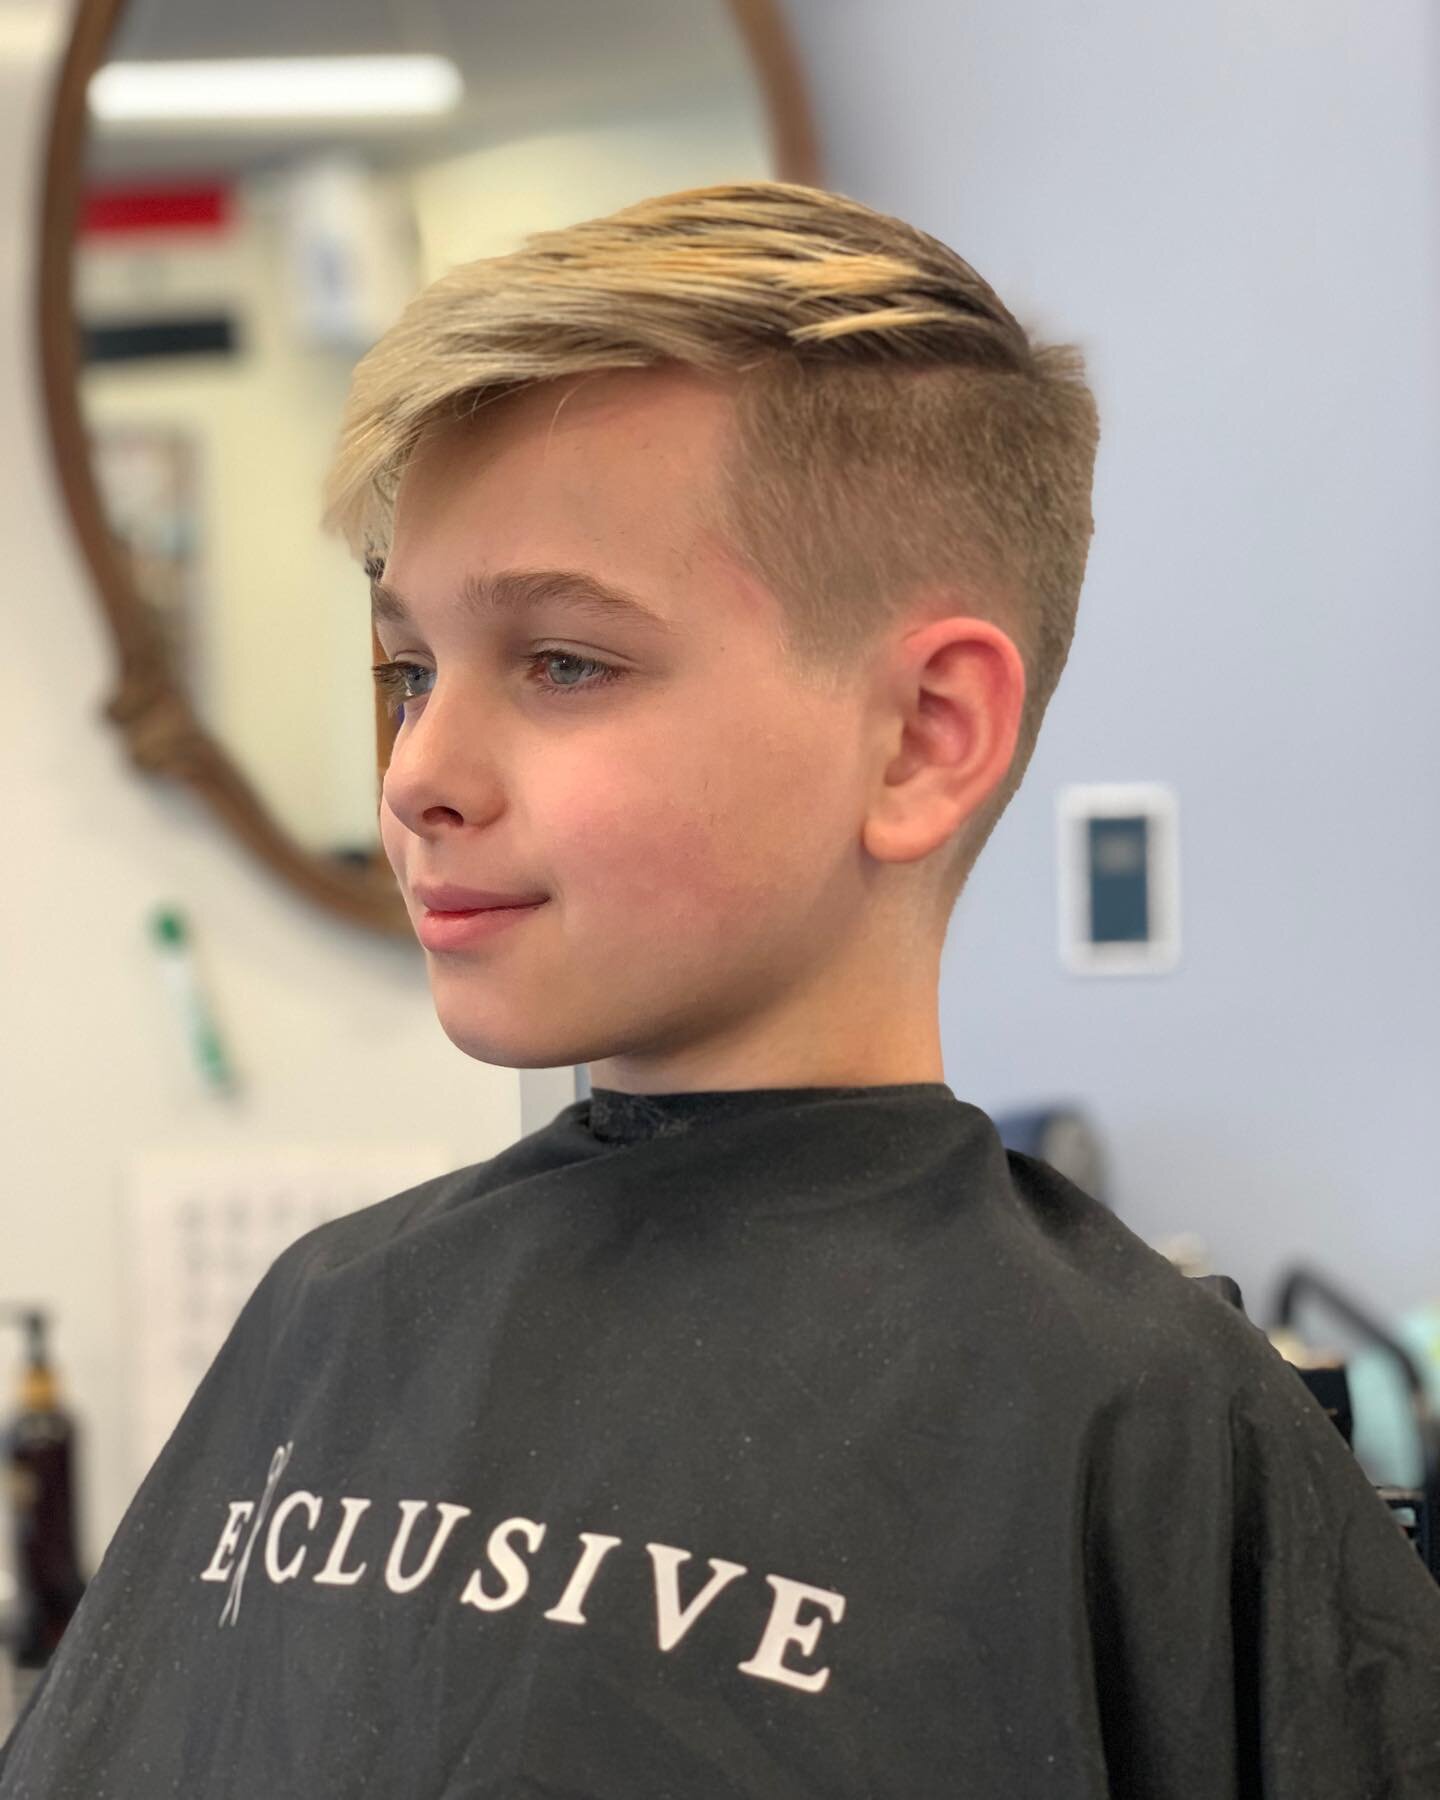 Loving others in our community is our priority, growing as a business is second. 

E ✂️ C L U S I V E 

#exclusive  #exclusivehaircuts #exclusivehairstudio #kidshair #kidshaircuts #childrenshairstyles #childrenshair #syracusehairstylist #syracusehair